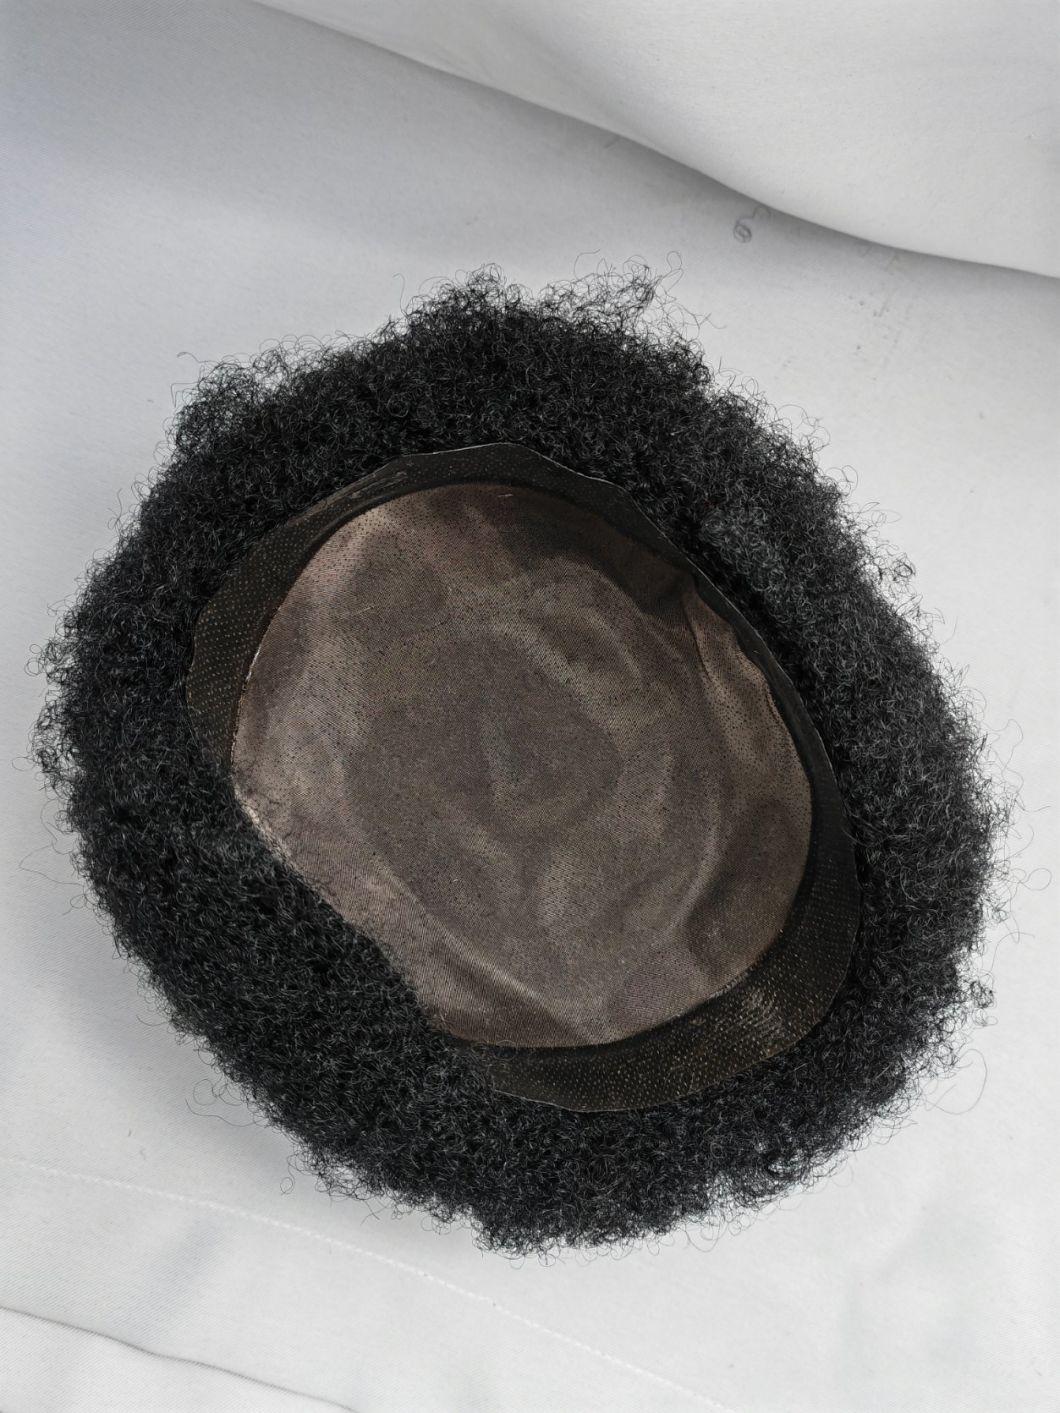 2022 Best Custom Made Natural Fine Mono Base Human Hairpiece Made of Remy Human Hair